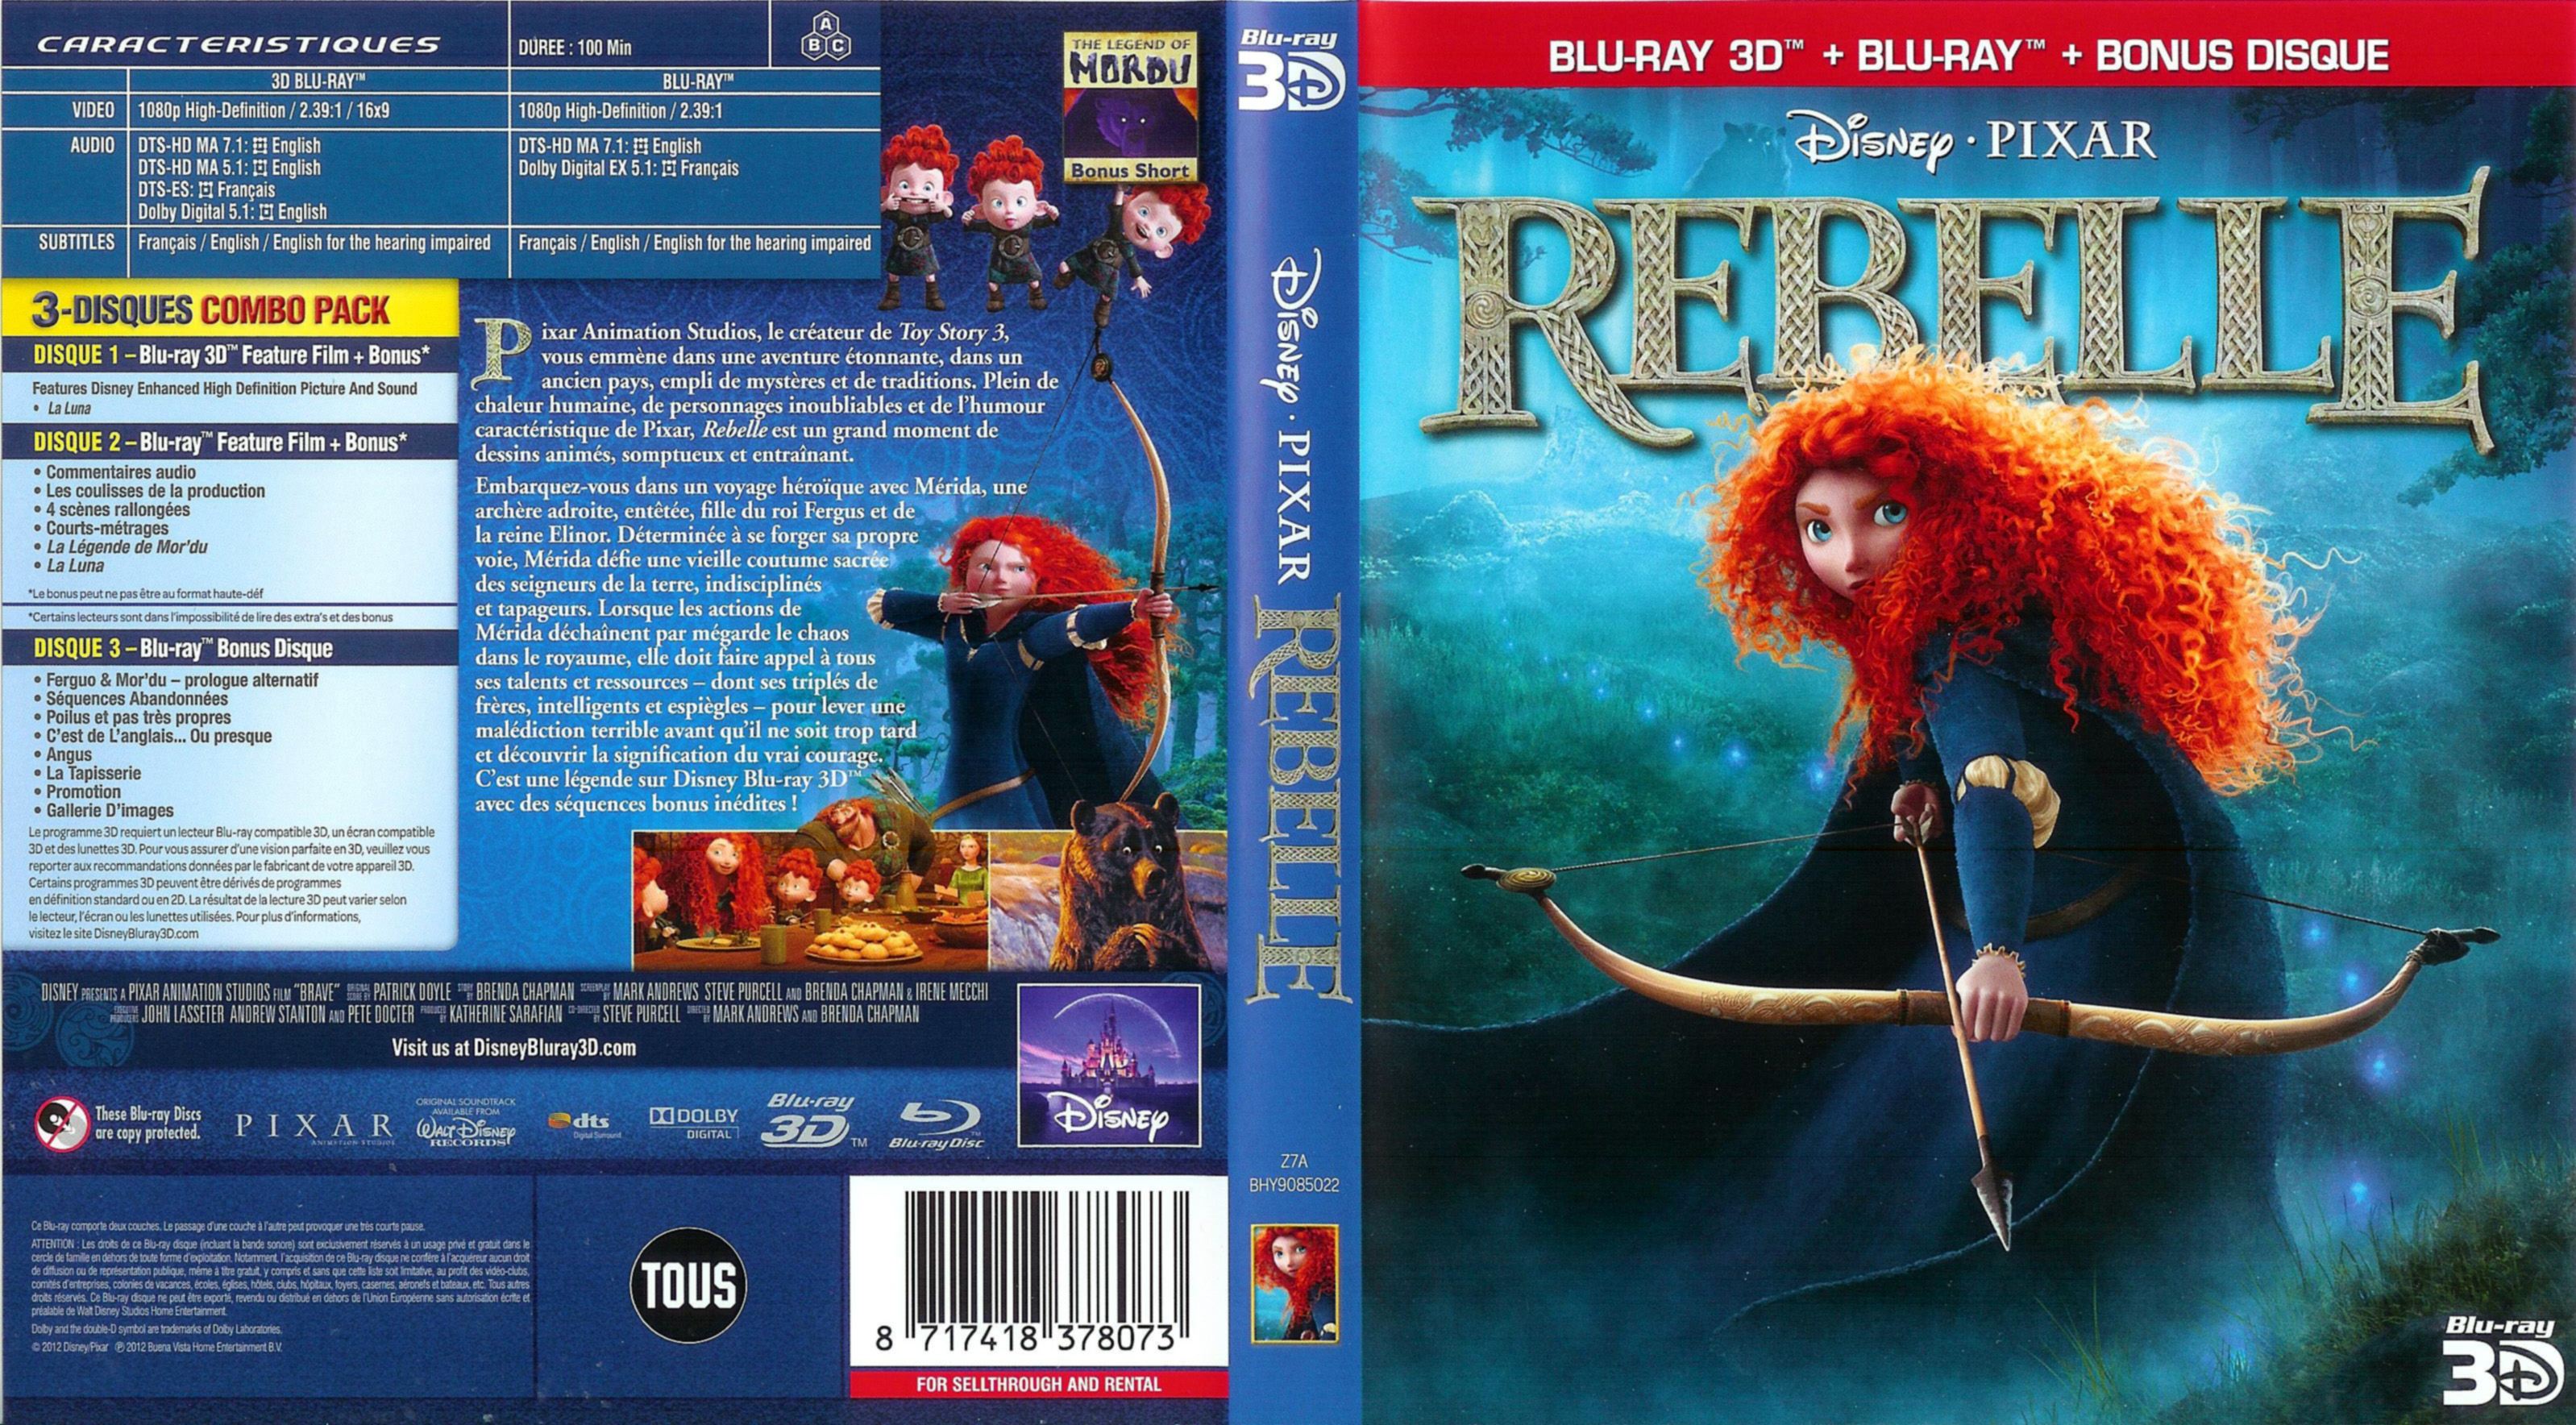 Jaquette DVD Rebelle 3D (BLU-RAY)